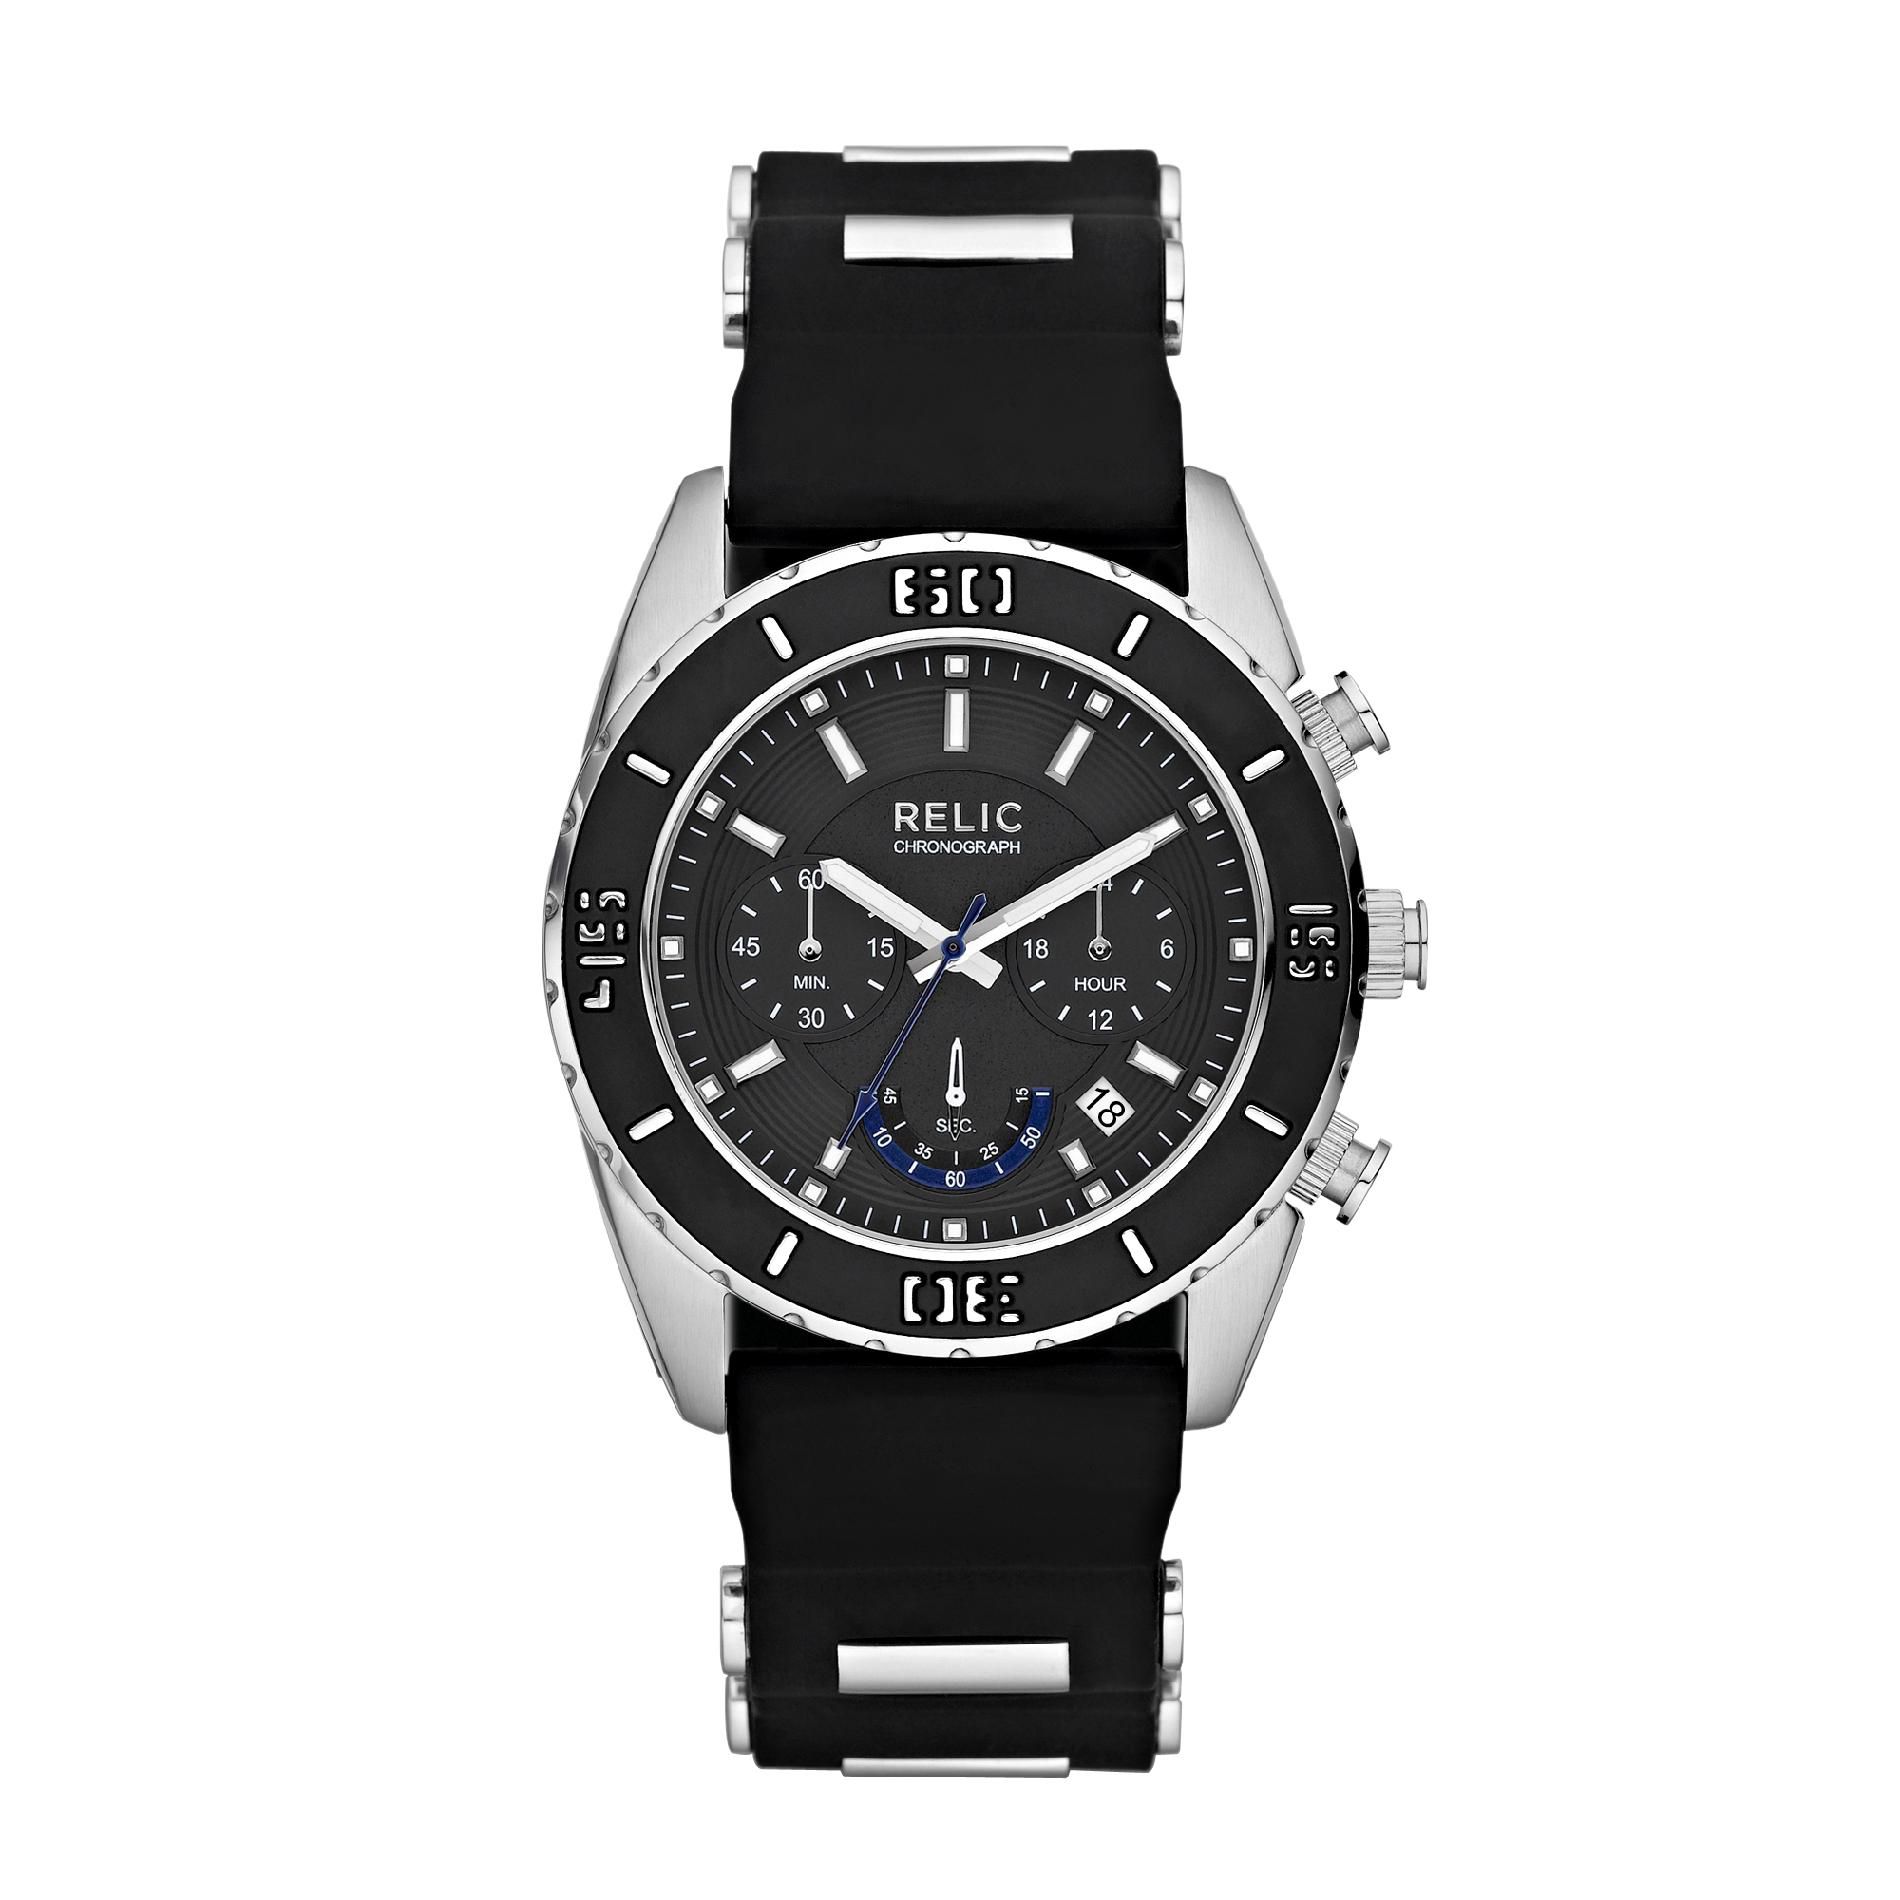 Luxury Men Watches: RELIC Men's Stainless Steel Chronograph Watch